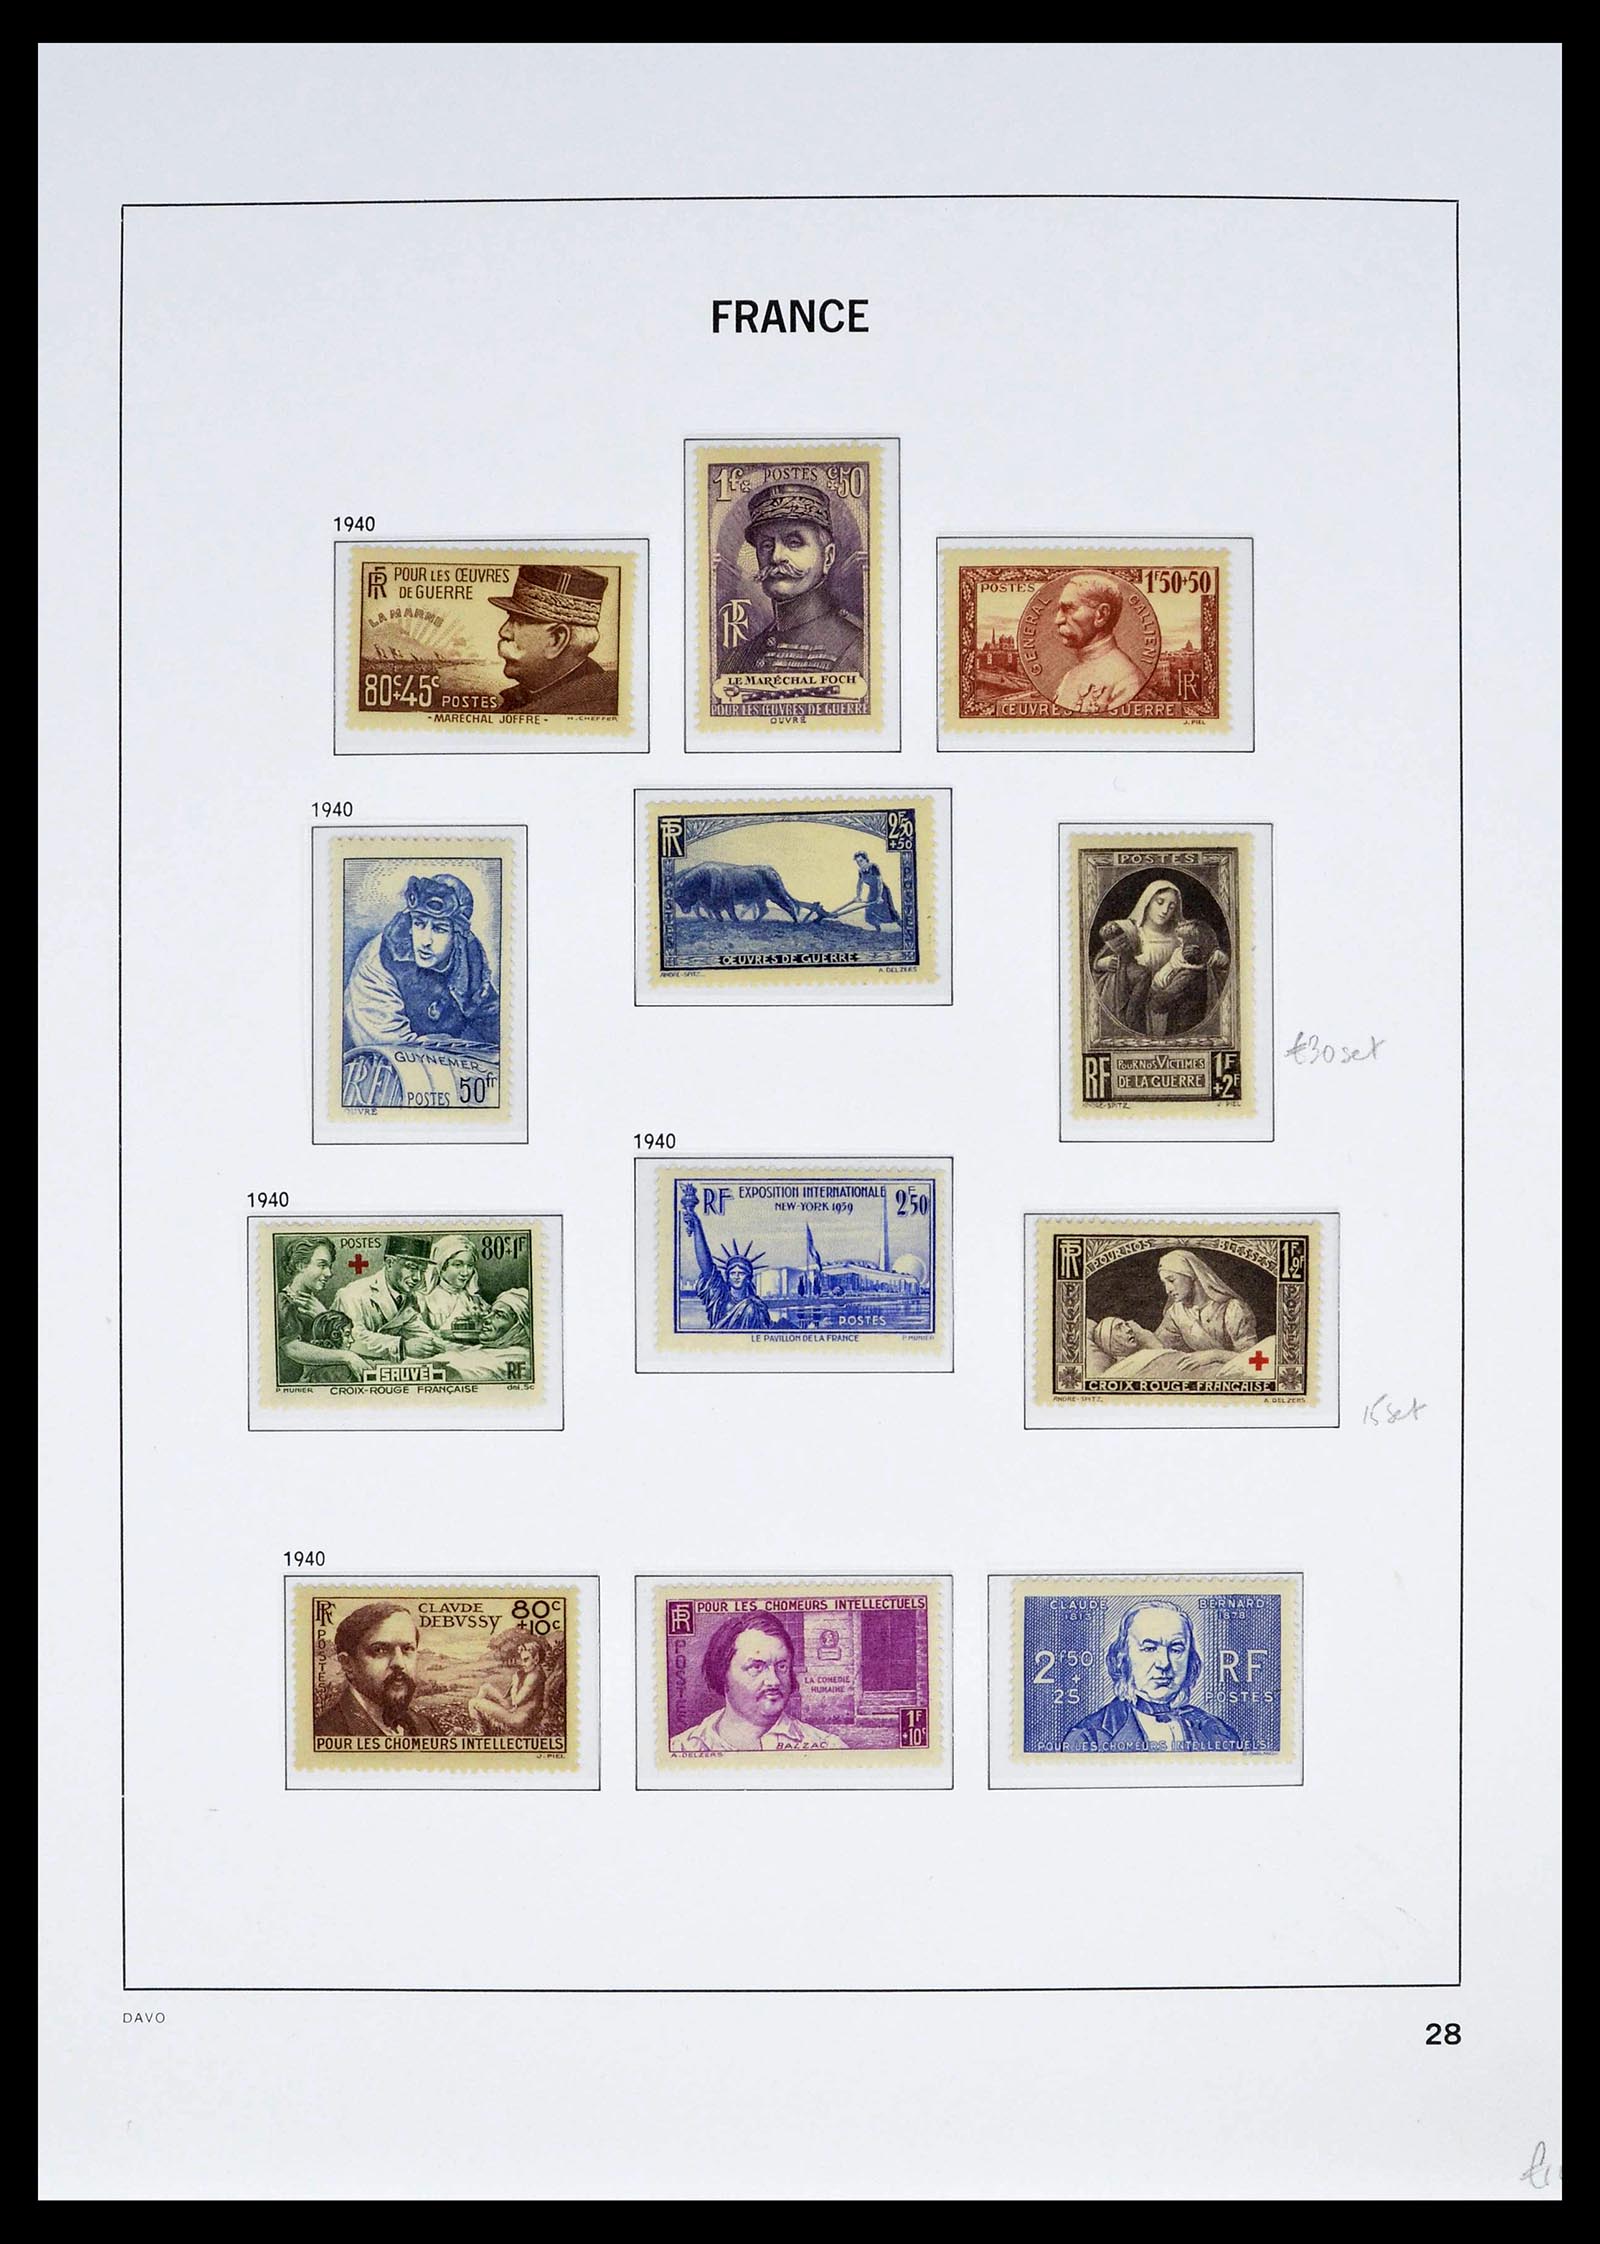 39335 0043 - Stamp collection 39335 France 1849-1969.